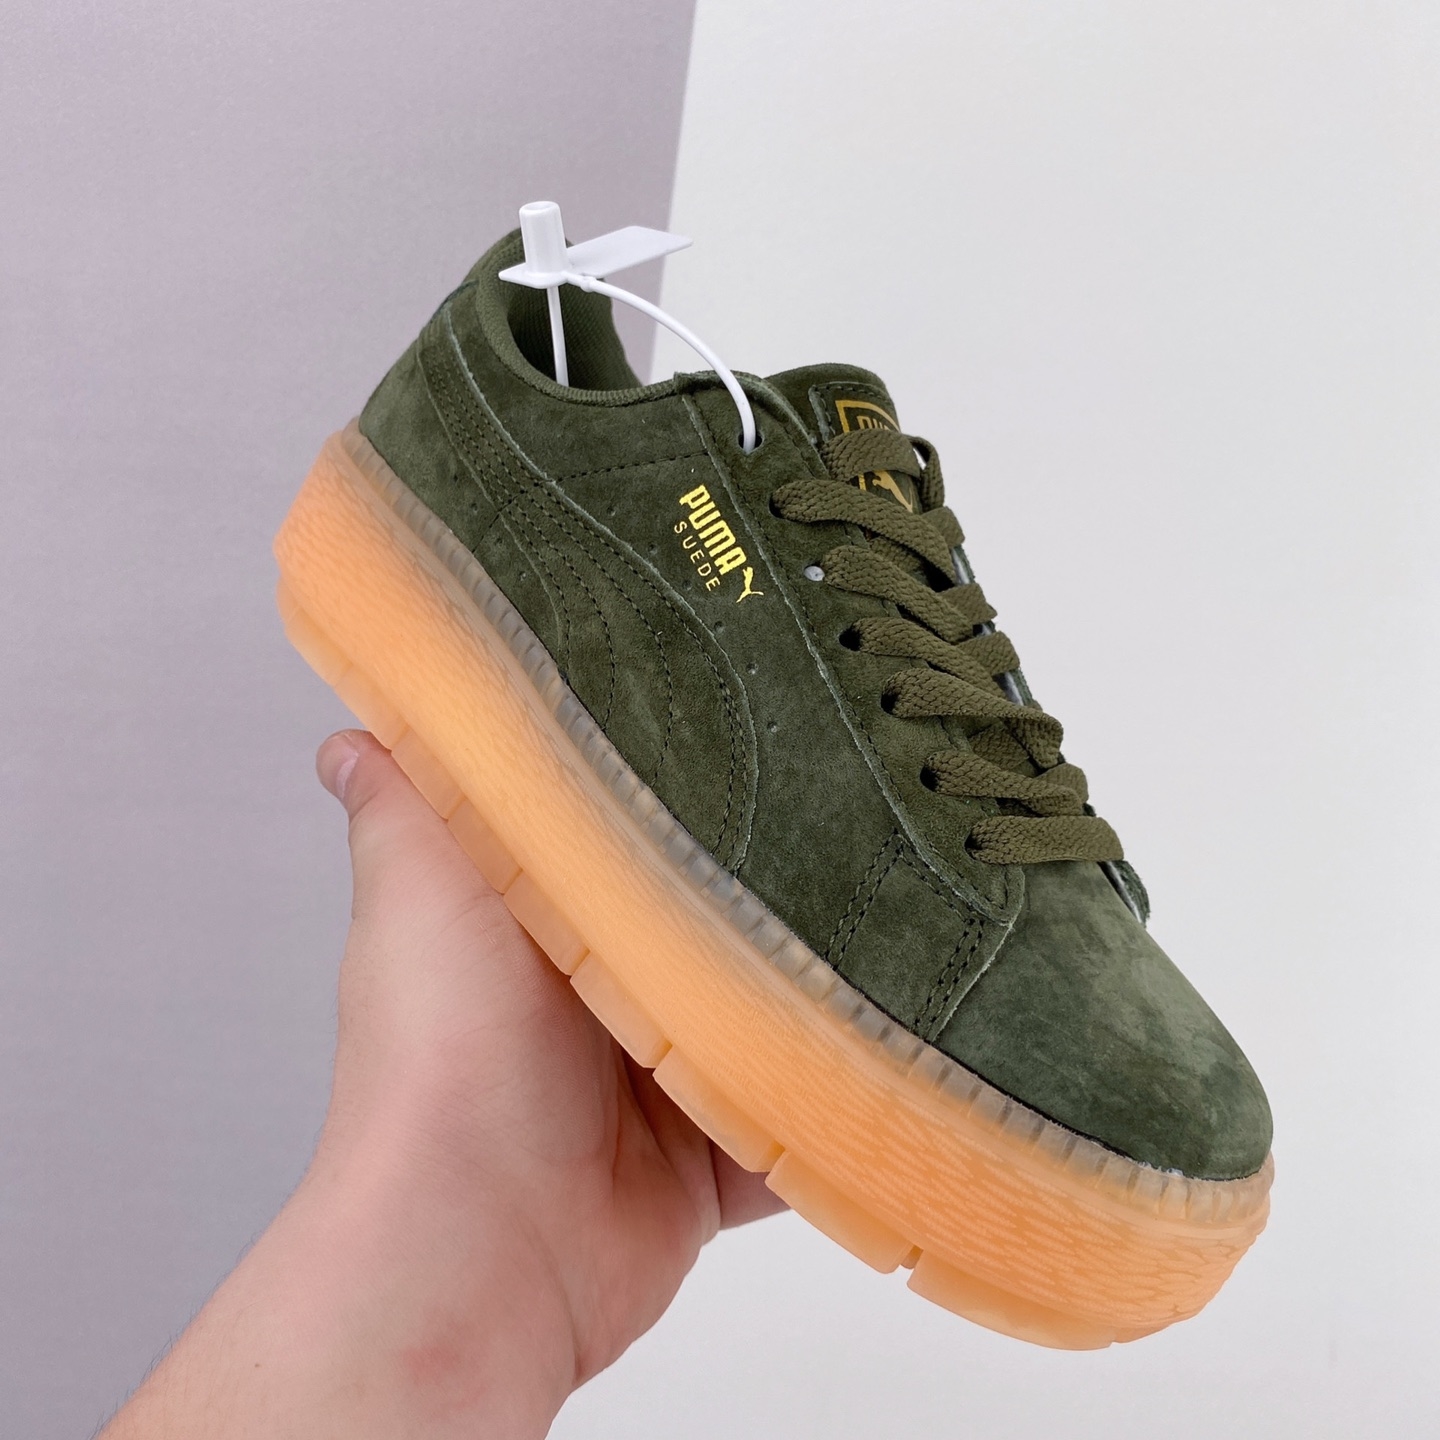 PUMA Suede Platform Trace Olive Night: Shop the Latest Stylish Sneakers